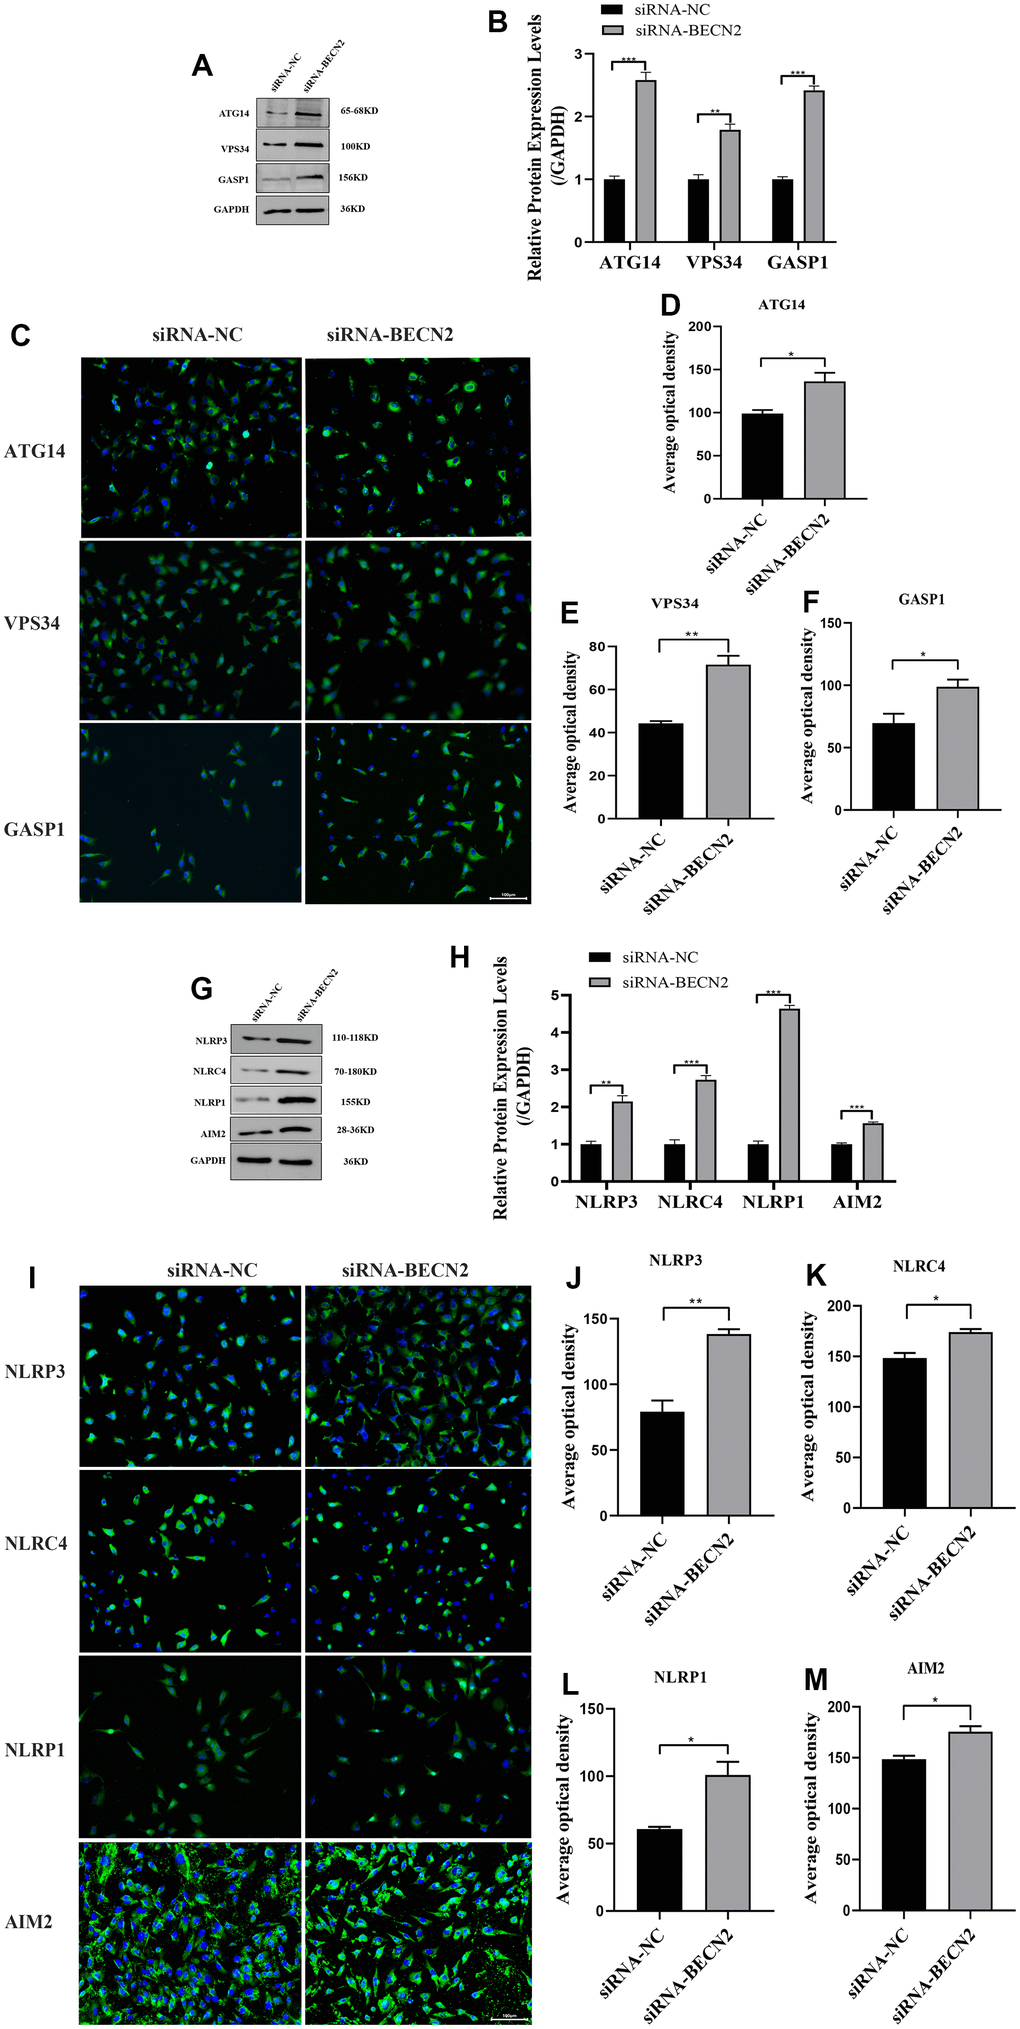 Decreased BECN2 activated the autophagy and inflammation of ATDC5. (A) Western blot was employed to detect the expression of ATG14, VPS34 and GASP1. (B) The protein expression of ATG14, VPS34 and GASP1 were determined using ImageJ software, GAPDH was used as the internal control, respectively (n=3). (C) ATG14, VPS34 and GASP1 expression were determined by immunofluorescence staining (scale bar: 100μm). (D–F) Average optical density was calculated by ImageJ software. (G) Western blot was employed to detect the expression of NLRP3, NLRC4, NLRP1 and AIM2. (H) The protein expression of NLRP3, NLRC4, NLRP1 and AIM2 were determined using ImageJ software, GAPDH was used as the internal control, respectively (n=3). (I) NLRP3, NLRC4, NLRP1 and AIM2 expression were determined by immunofluorescence staining (scale bar: 100μm). (J–M) Average optical density was calculated by ImageJ software. All data represent mean ± SD. All in vitro experiments were repeated three times independently. * p p p 